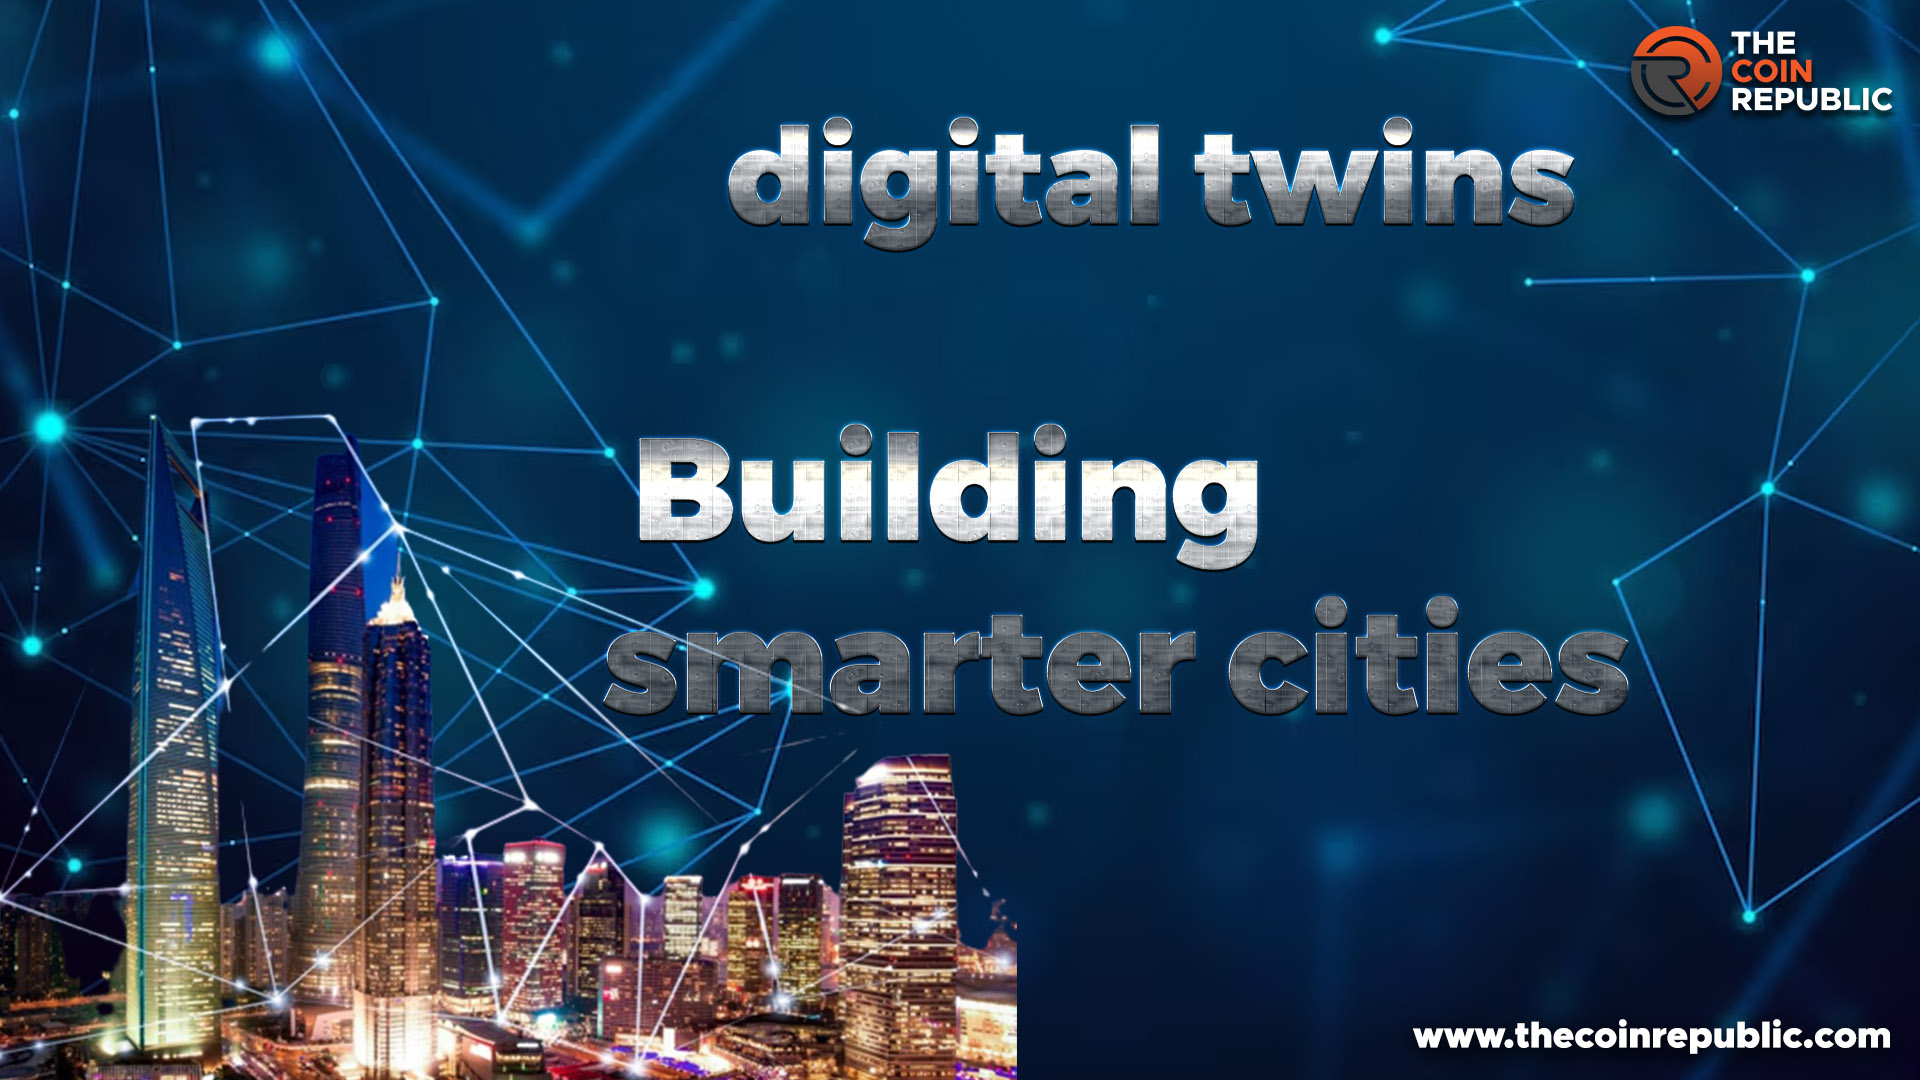 Unity Technologies is Making Cities Smarter With Digital Twins